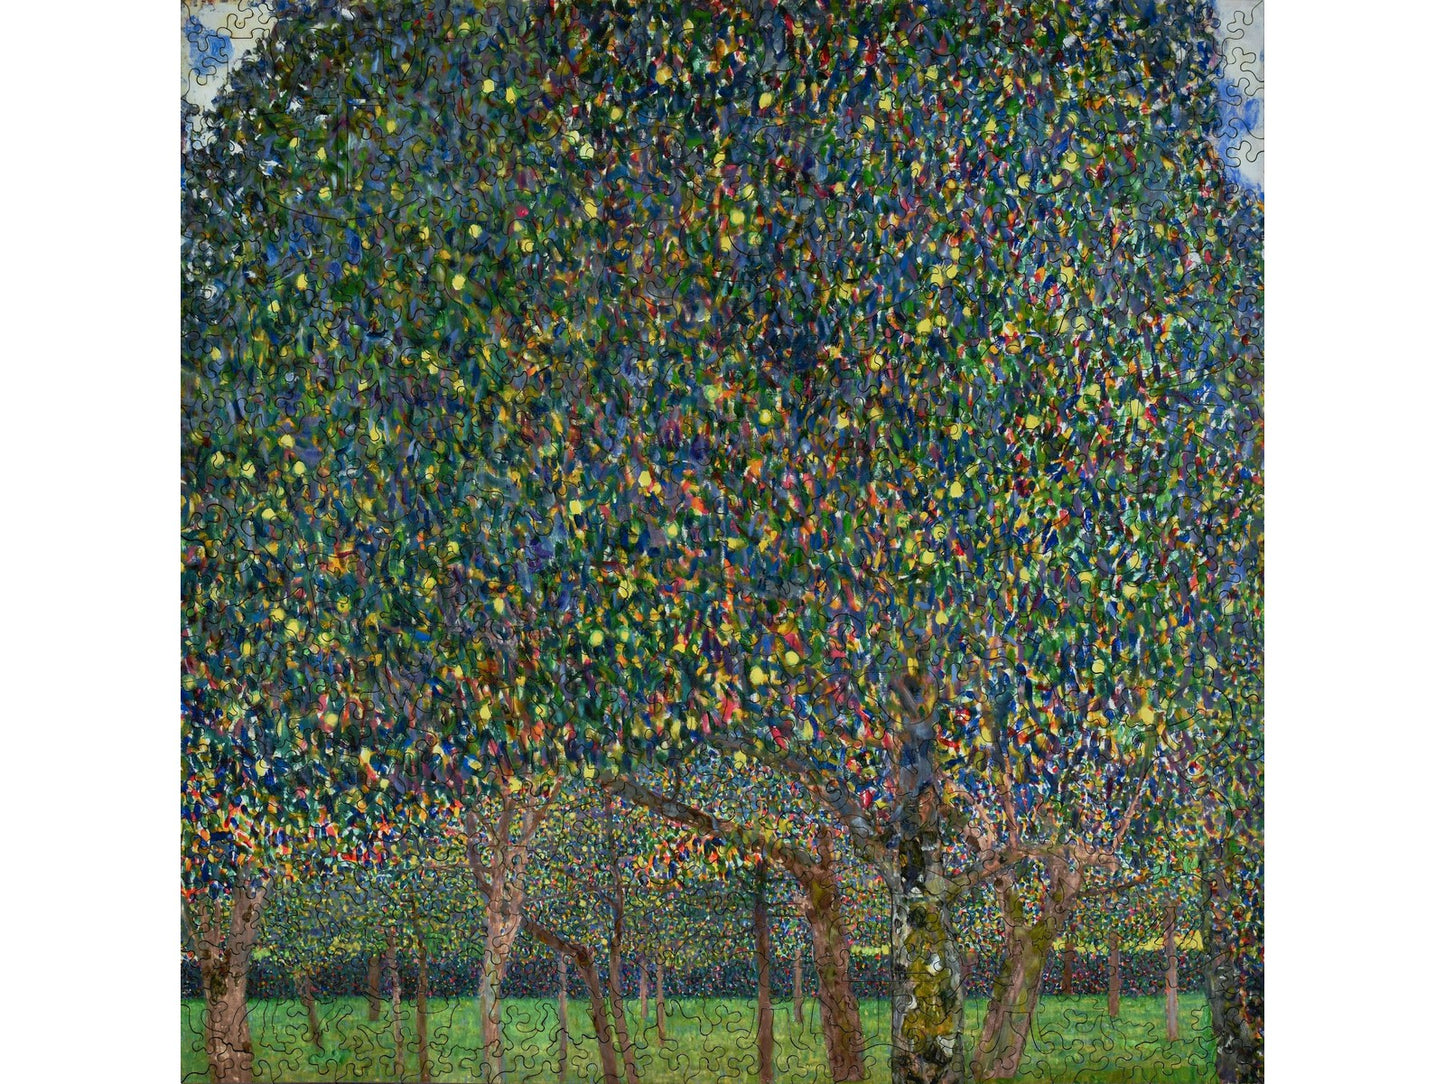 The front of the puzzle, Pear Tree, which shows a fruit tree orchard.